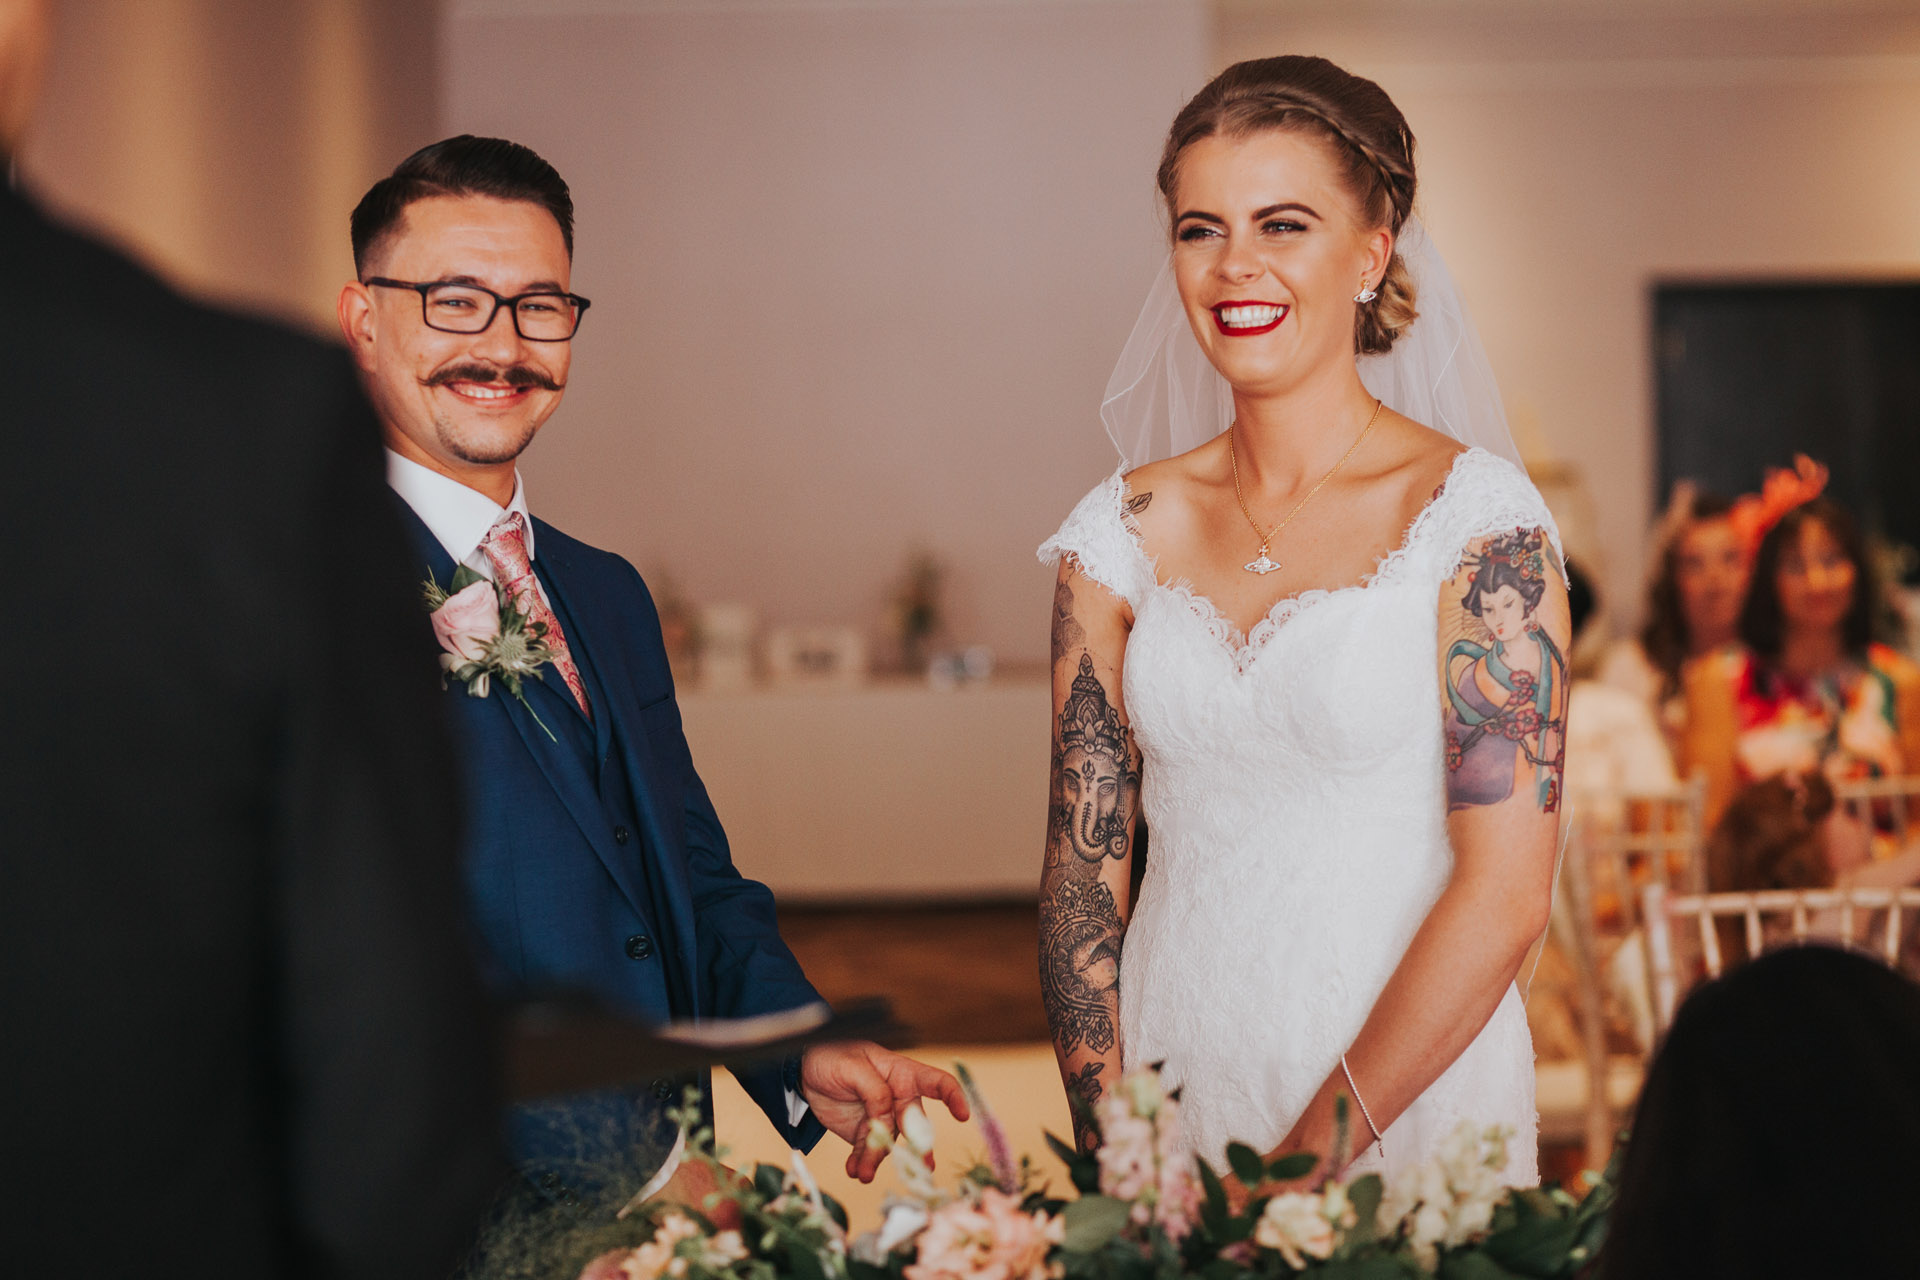 Bride and groom look happy on their wedding day in Manchester